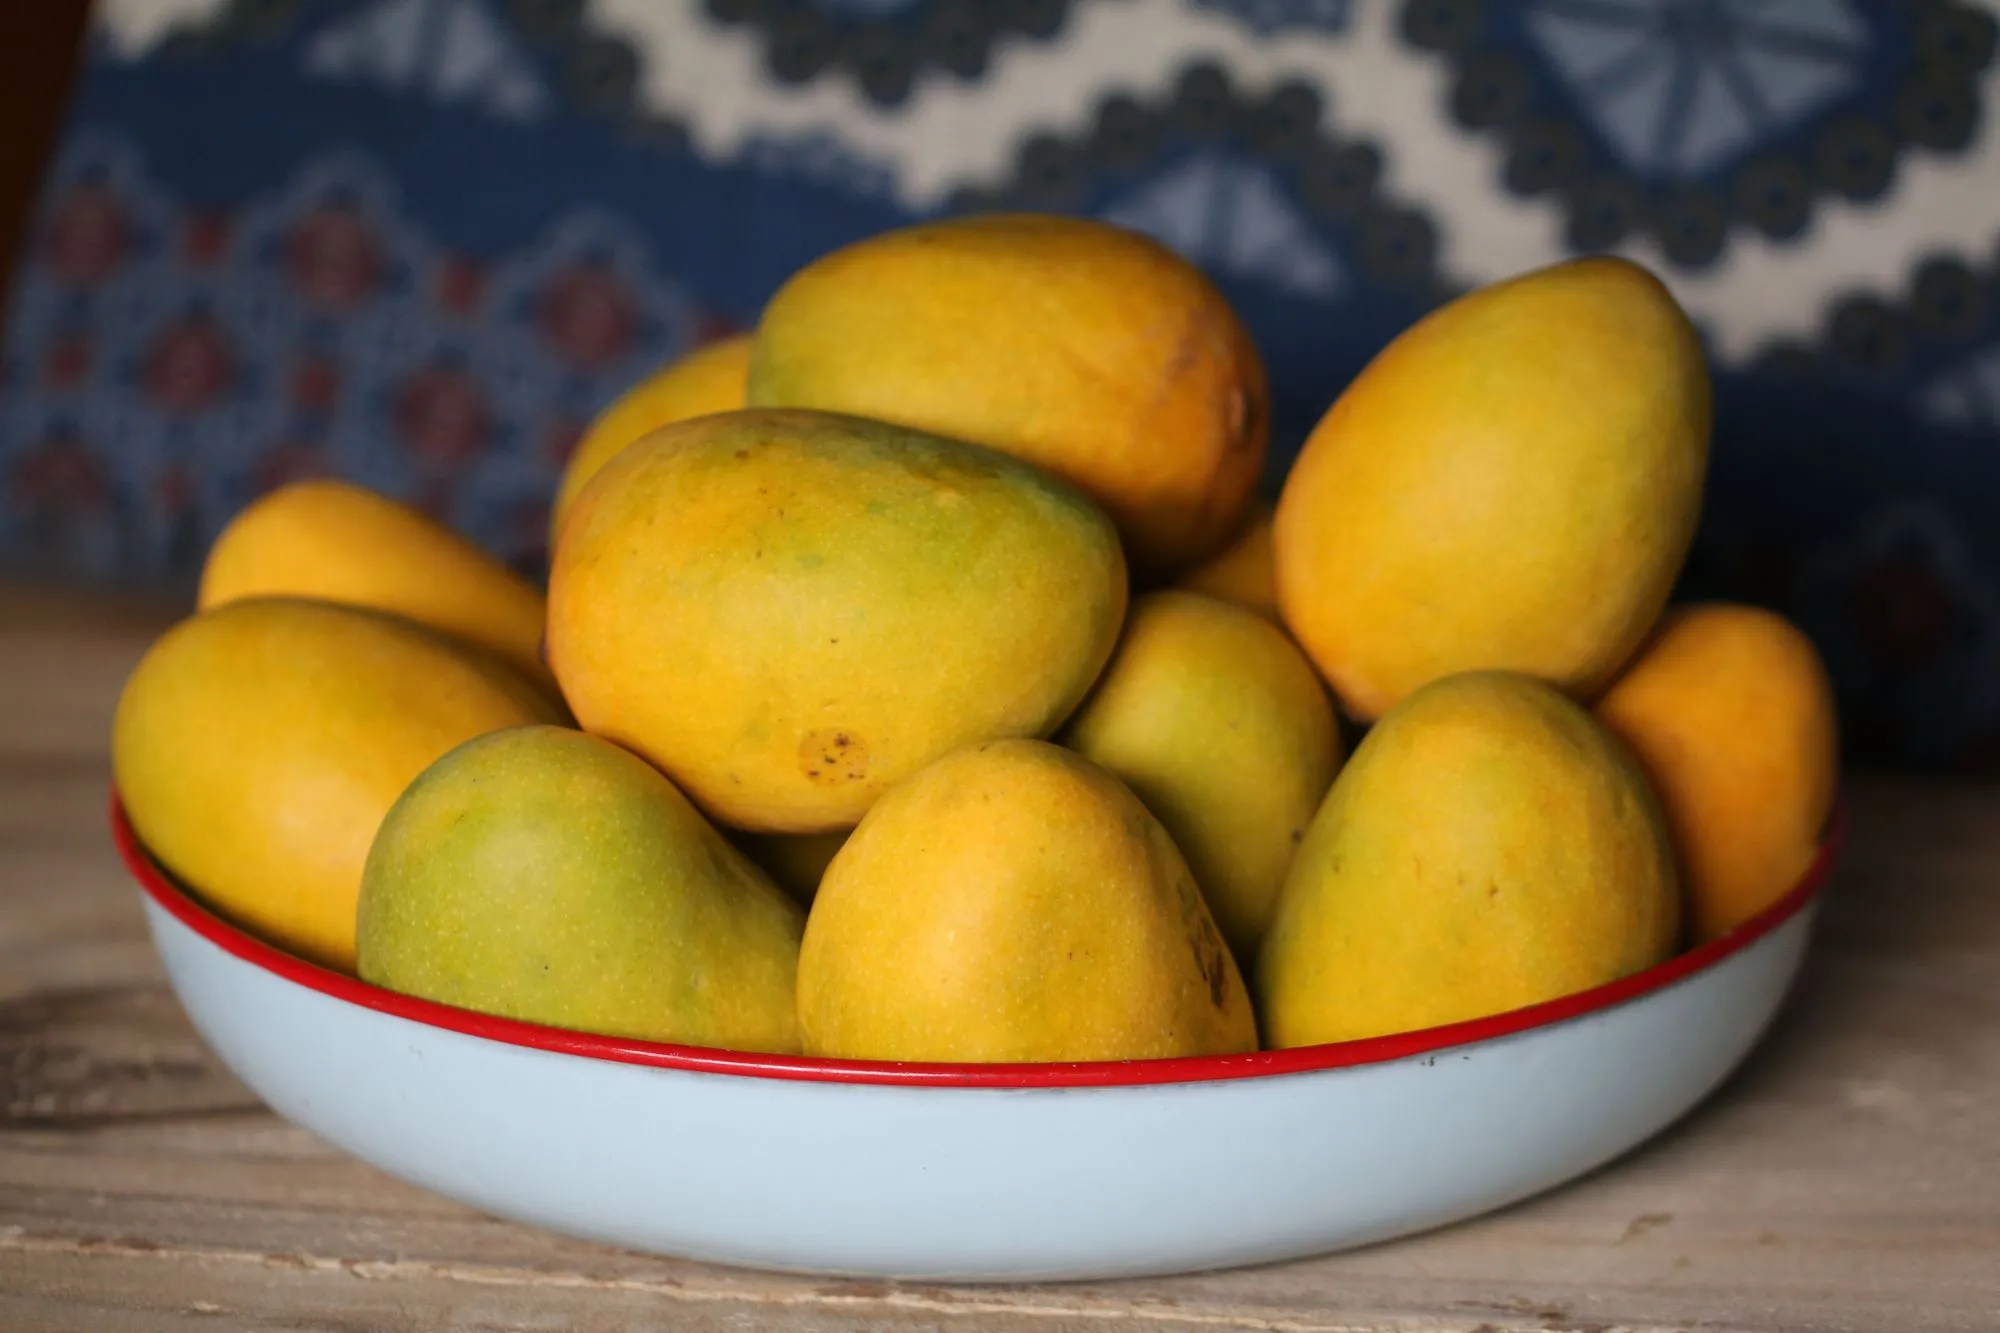 How Do You Know When A Mango Is Ripe? Tips To Pick A Ripe Mango